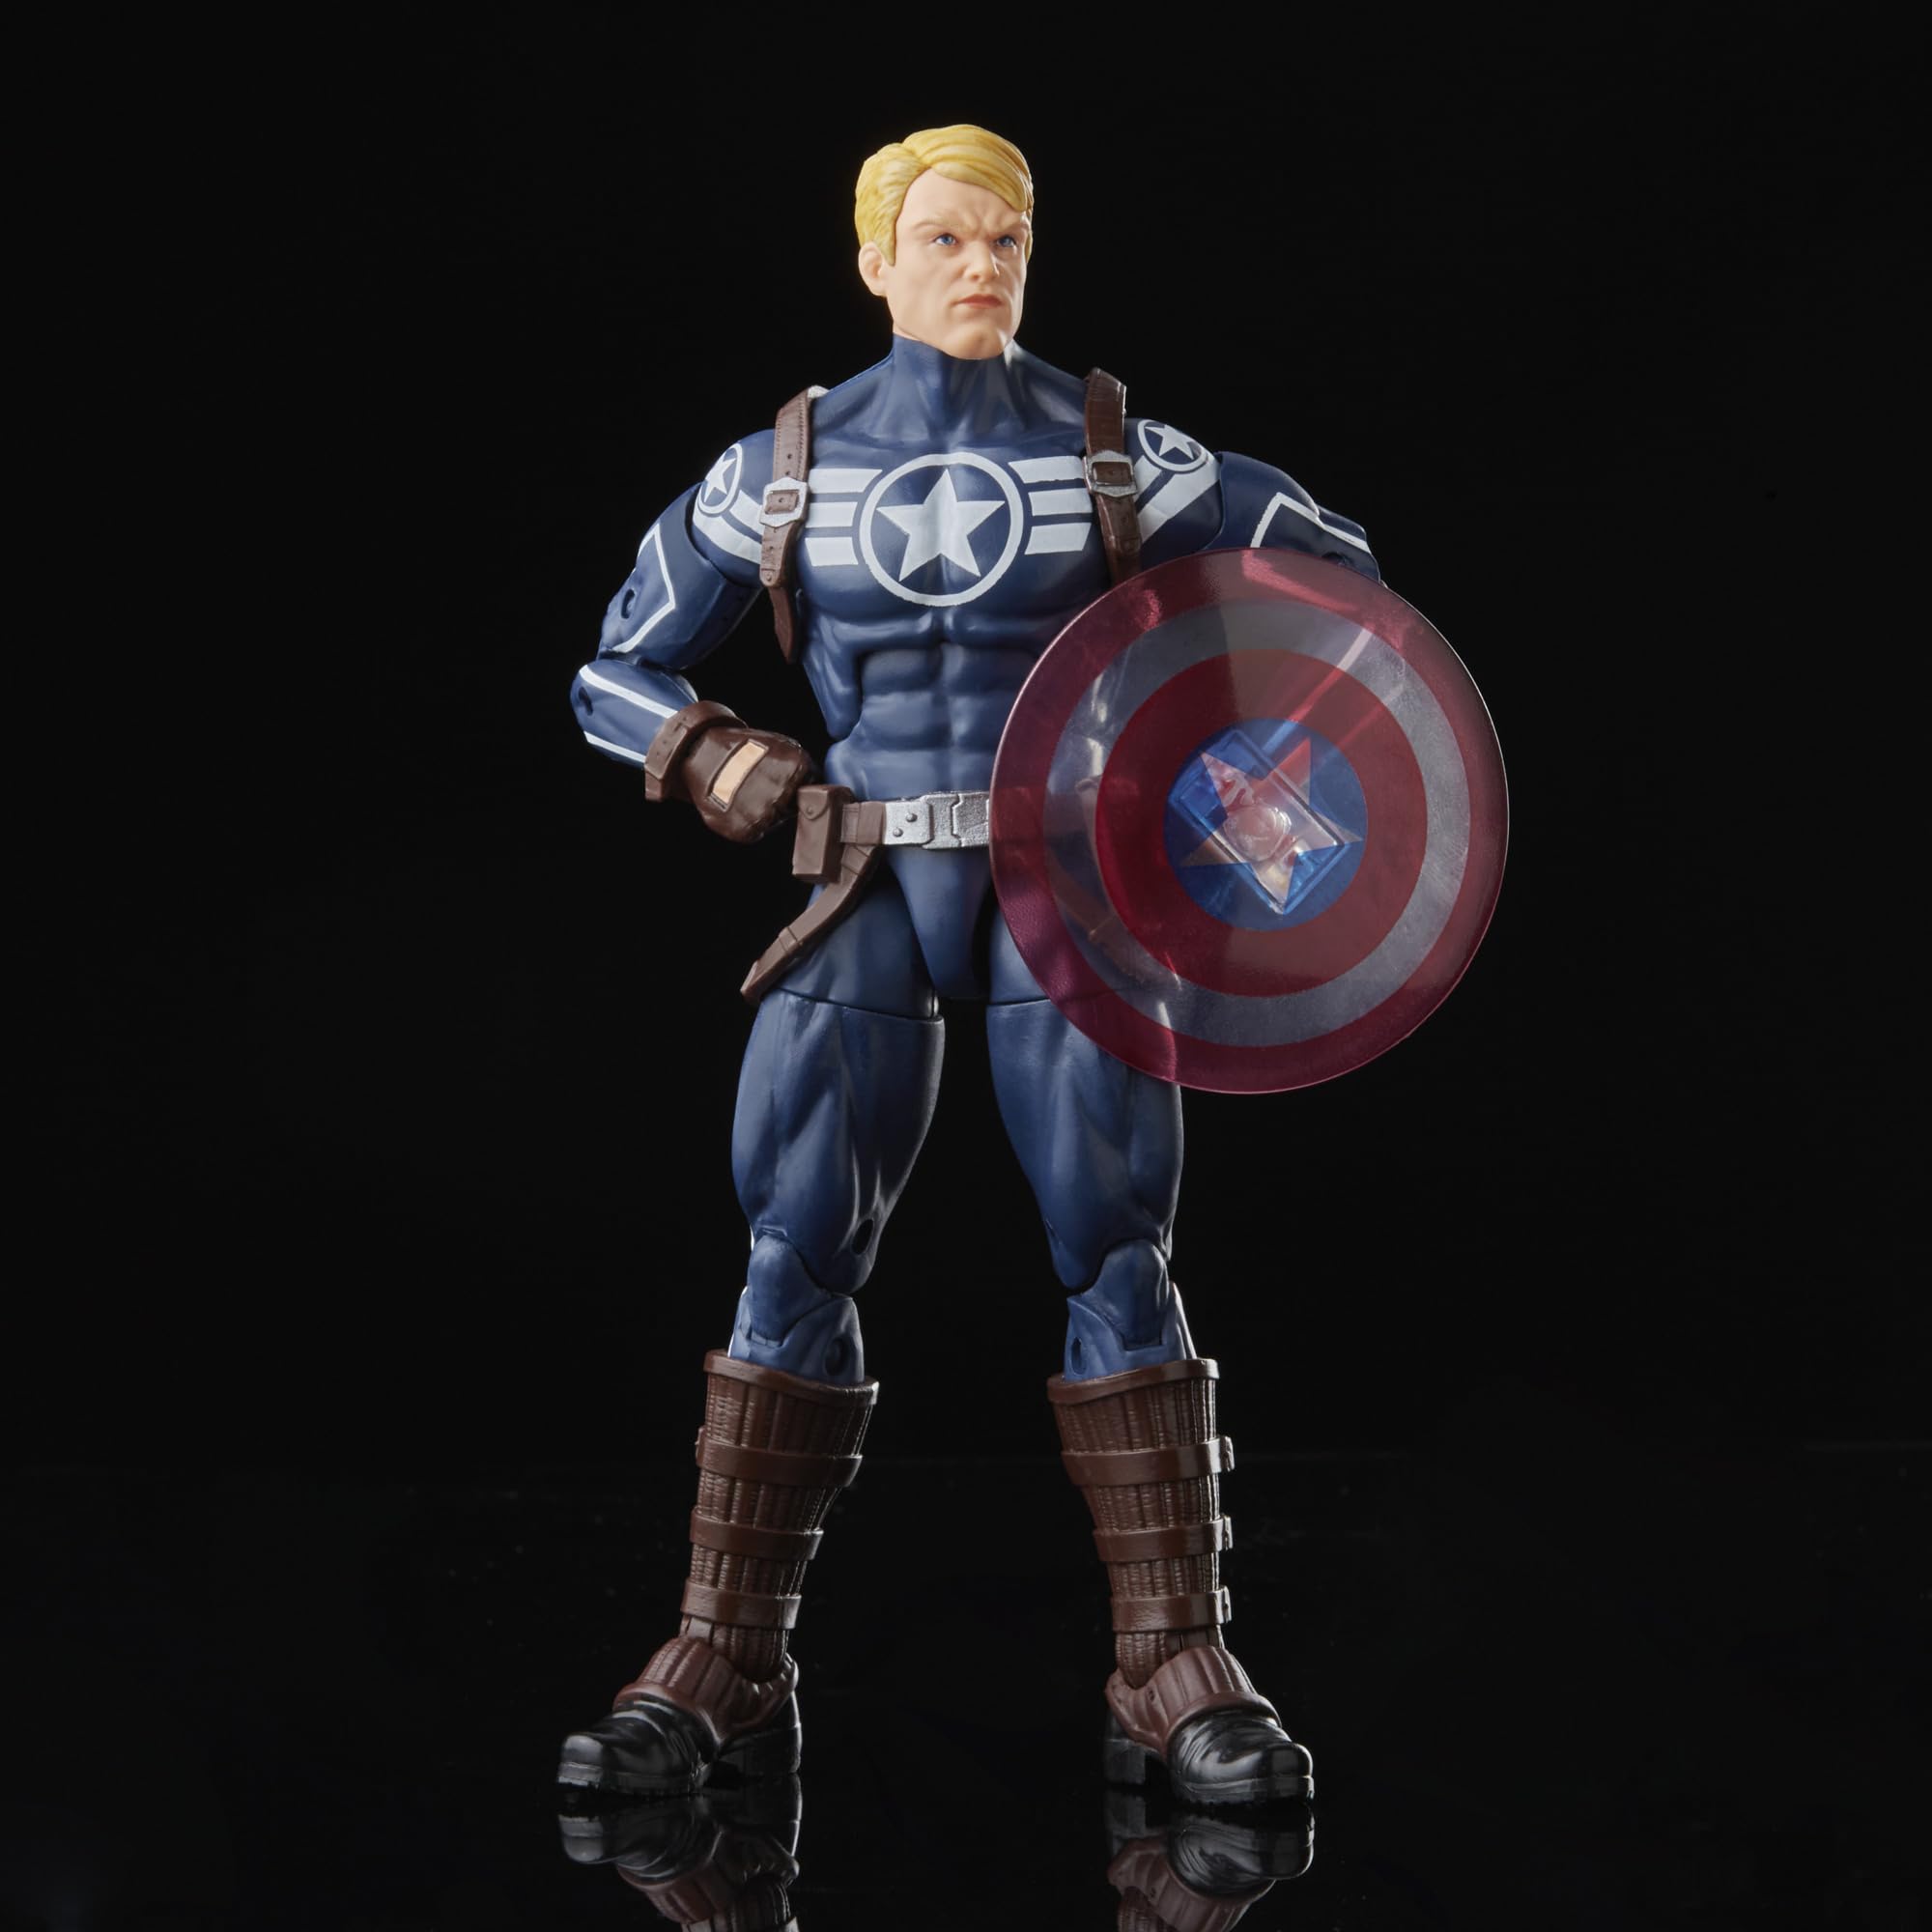 Marvel Legends Series Marvel Comics Commander Rogers 6-Inch Collectible Action Figures, Toys for Ages 4 and Up